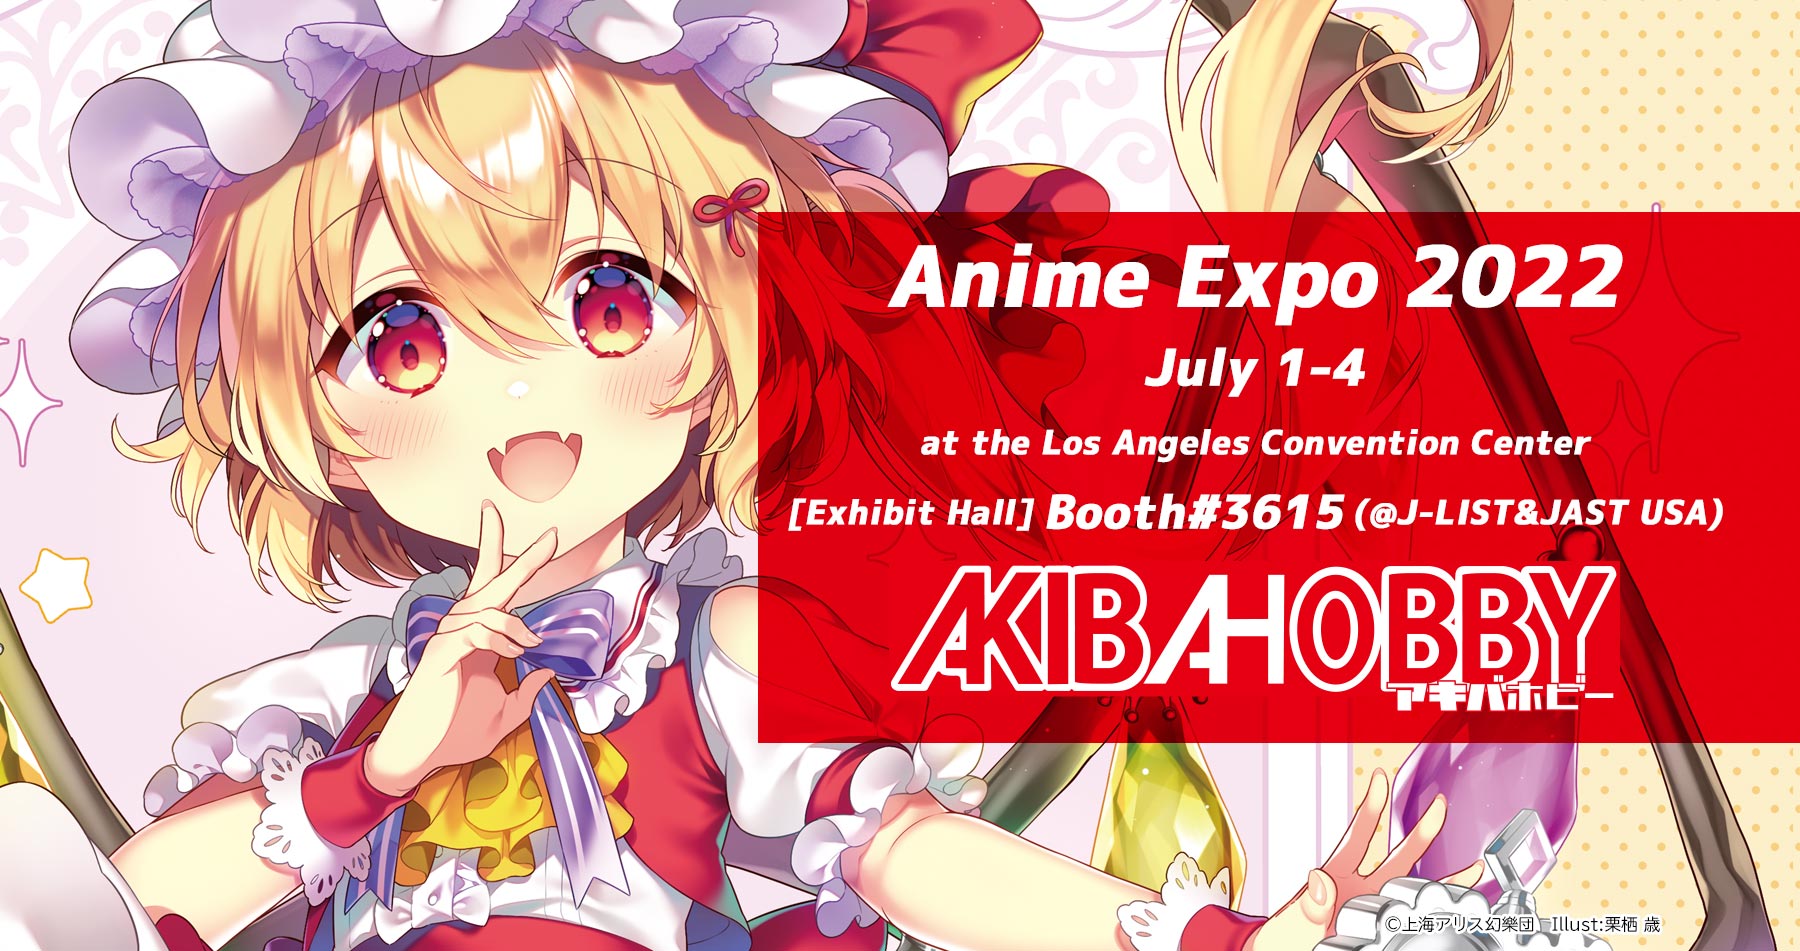 AX2022]Akiba Hobby to Exhibit at Anime Expo 2022! Selling goods from —  アキバホビー/AKIBA-HOBBY